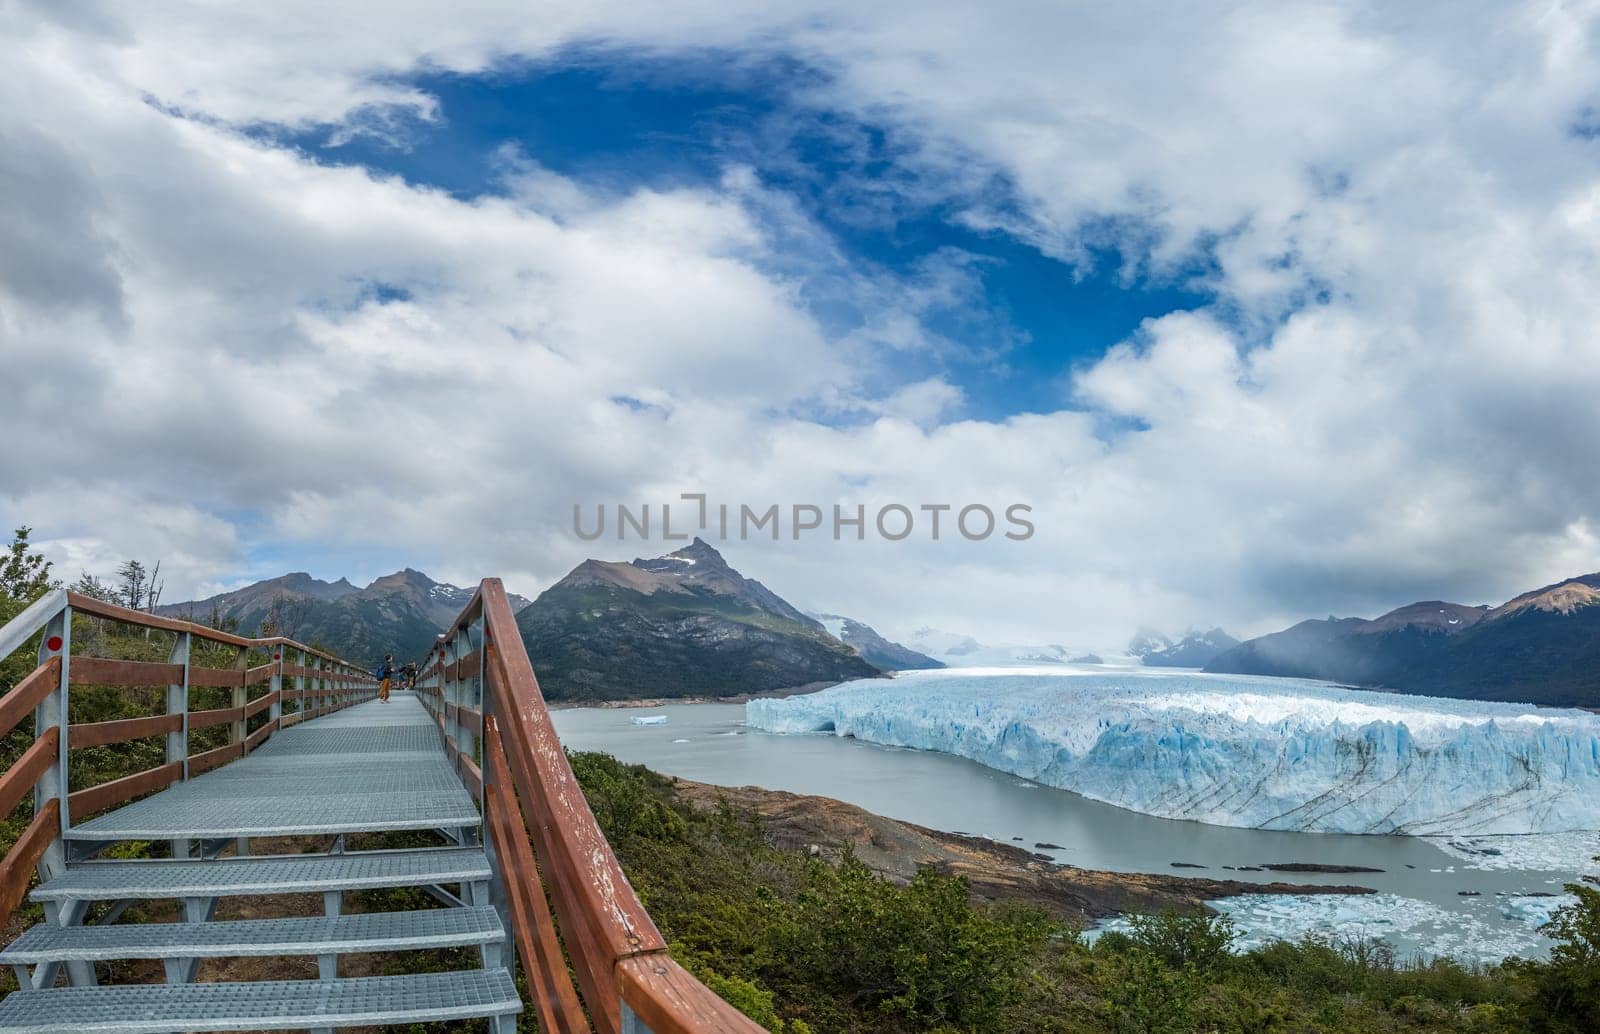 Glacier seen from walkway under vibrant clouds.